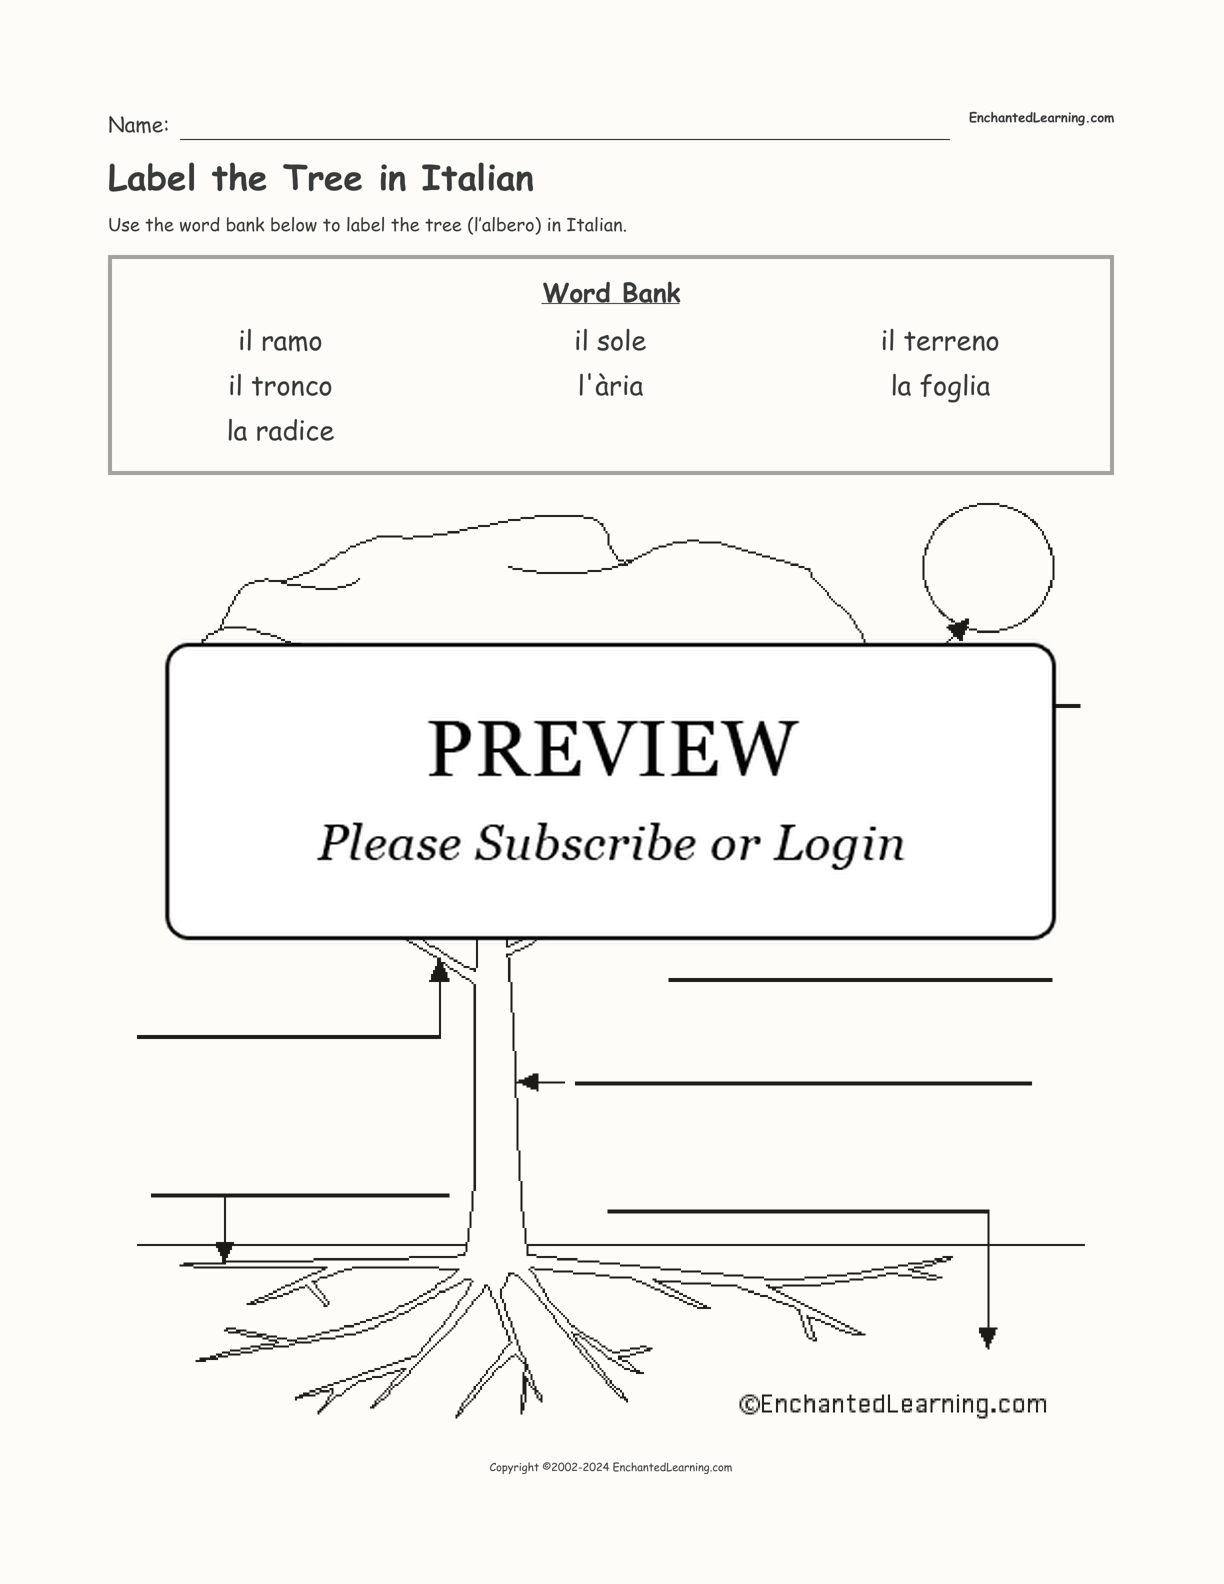 Label the Tree in Italian interactive worksheet page 1